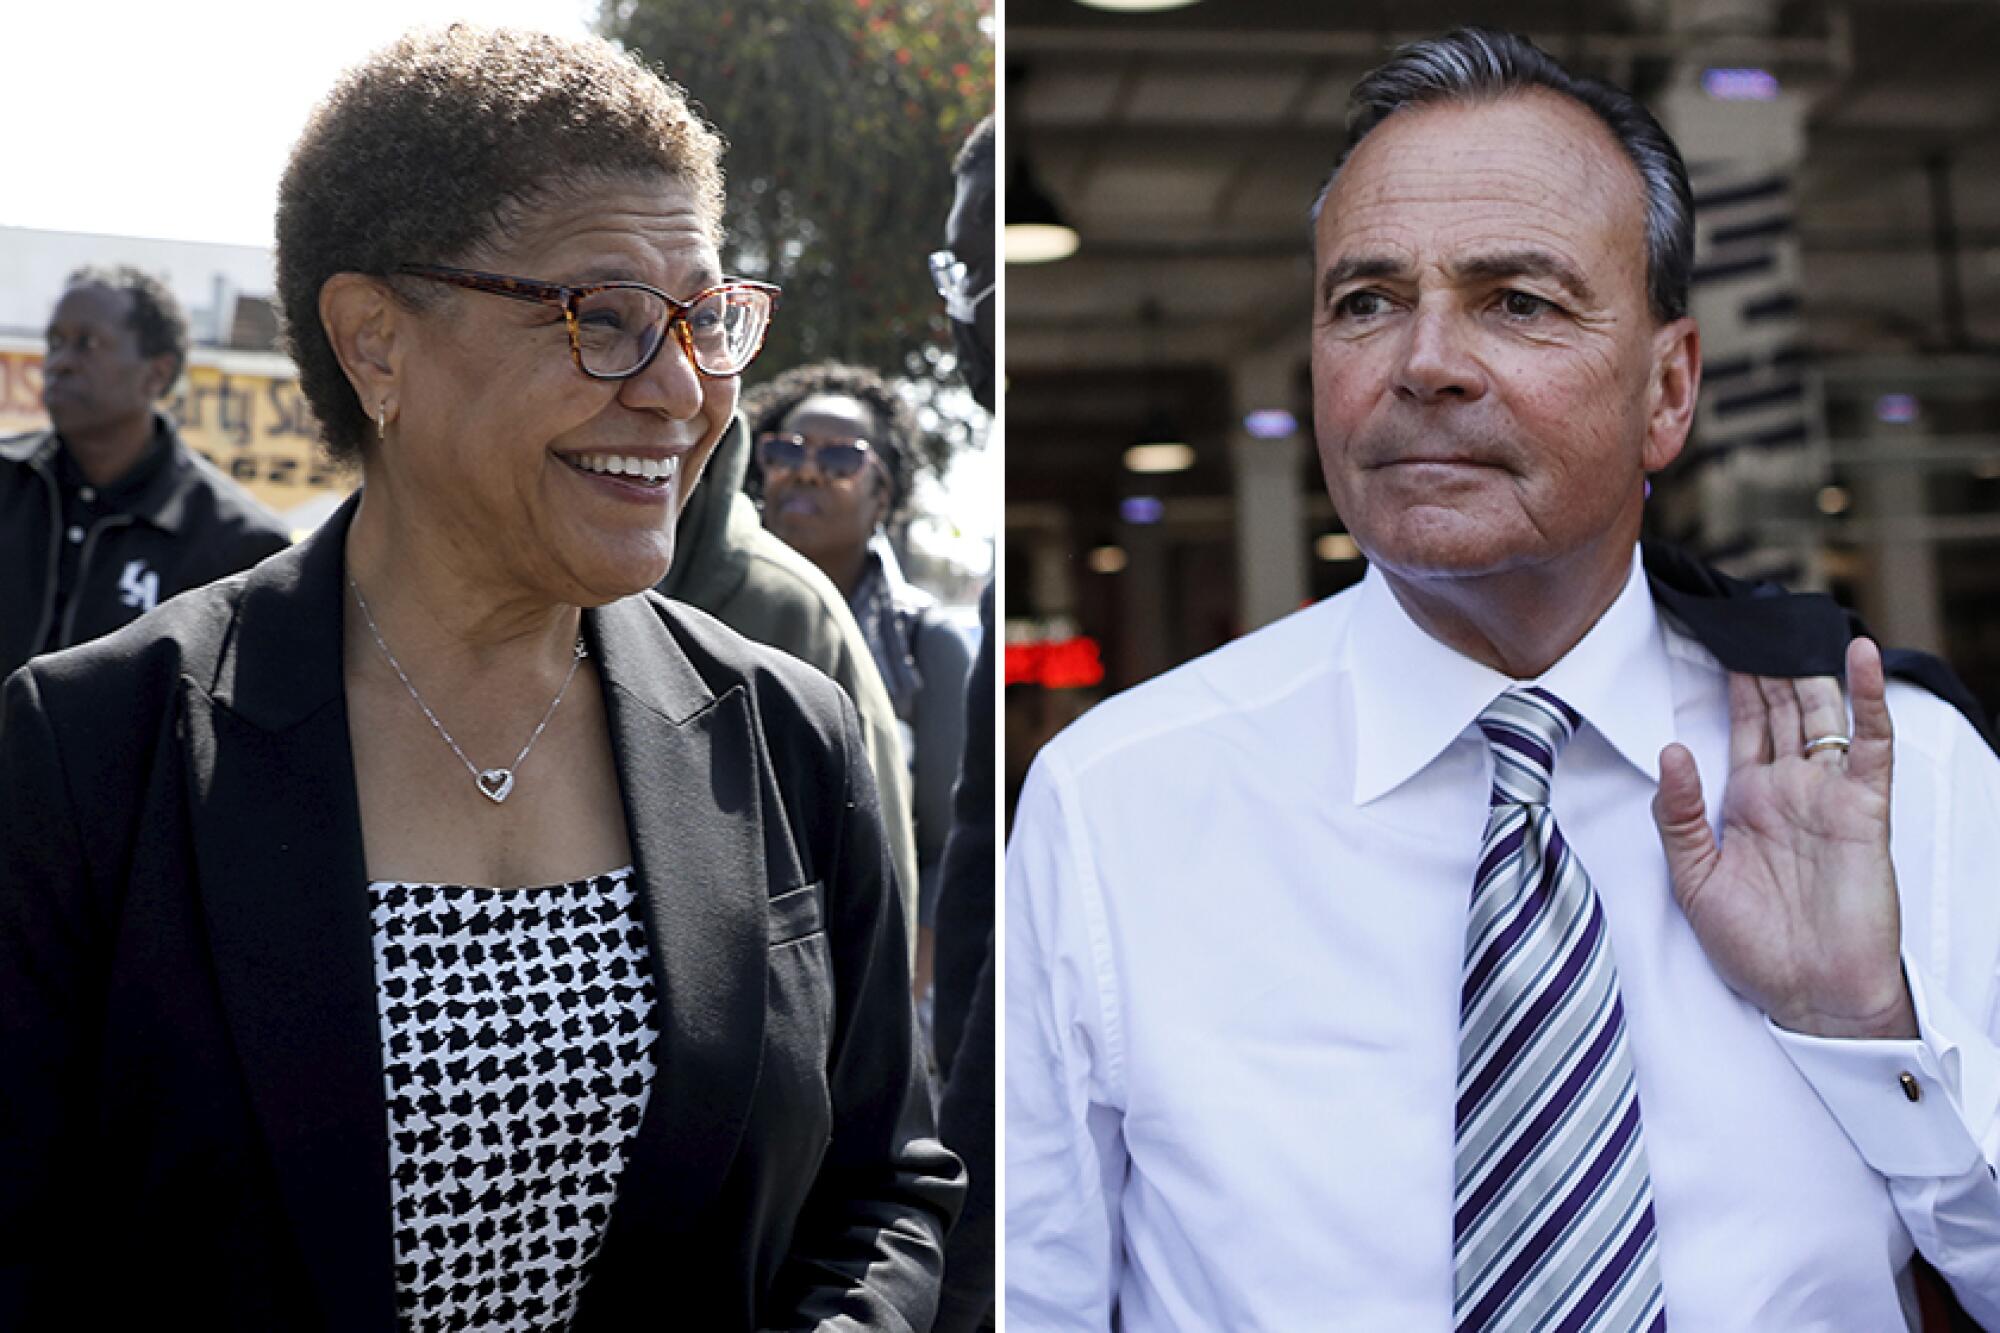 L.A. mayoral candidates Karen Bass, left, and Rick Caruso, right.